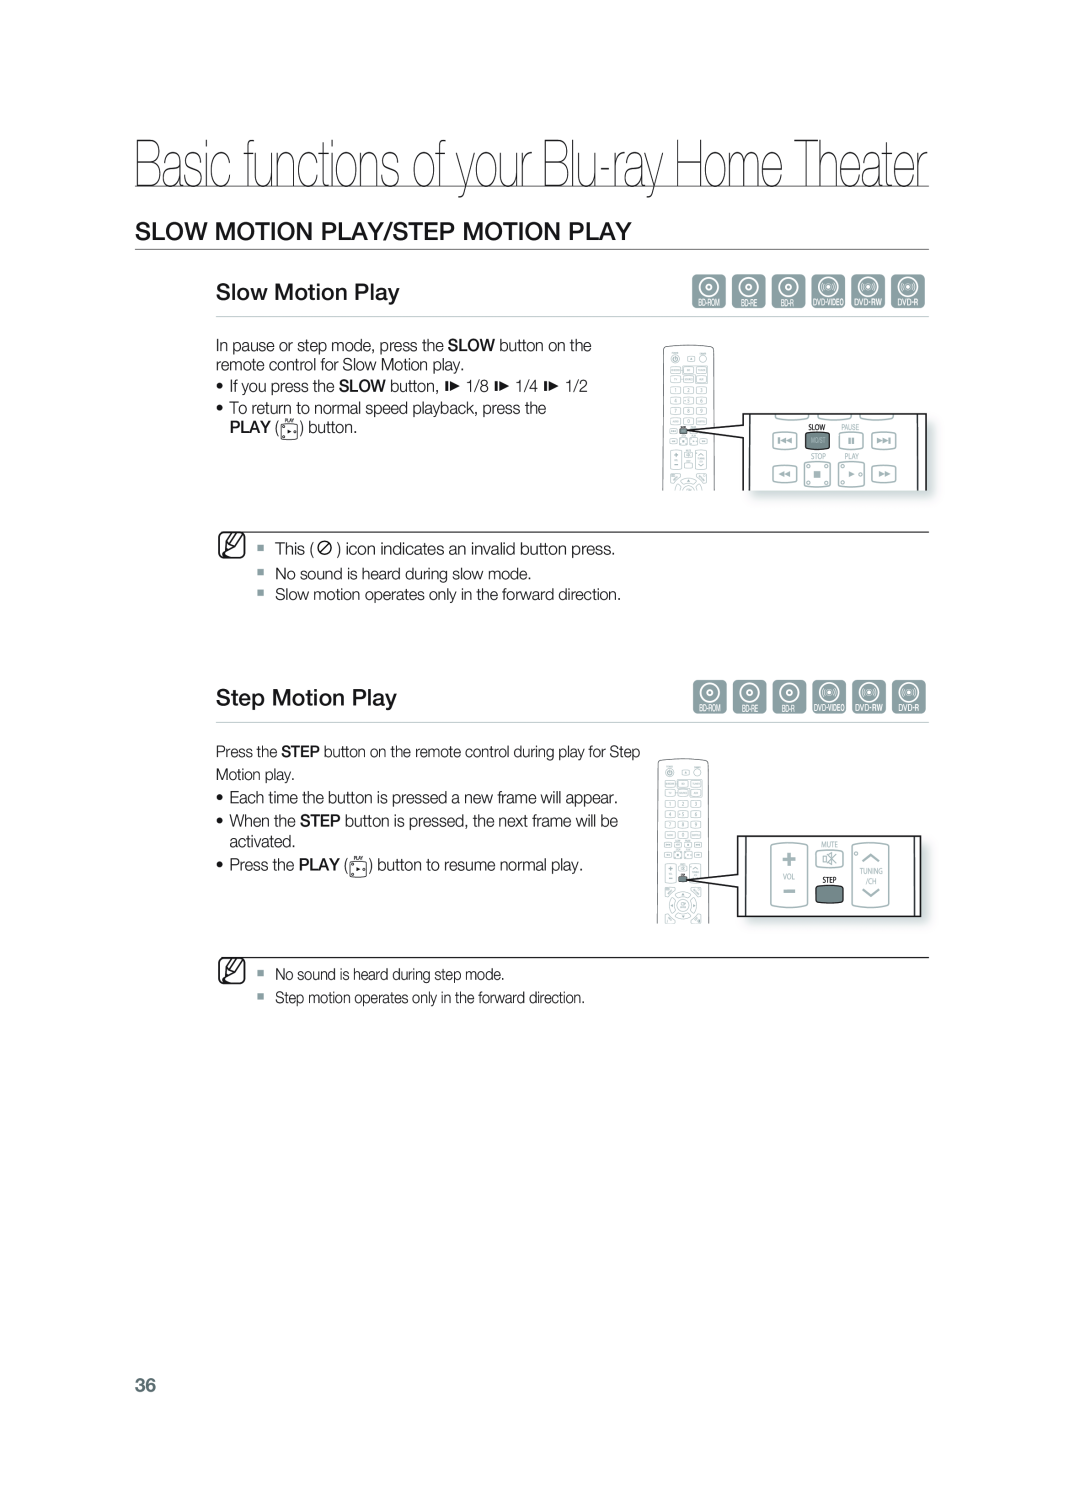 Samsung HT-BD1255, HT-BD1252 Slow Motion Play/Step Motion Play, Basic functions of your Blu-rayHome Theater, hgfZCV 